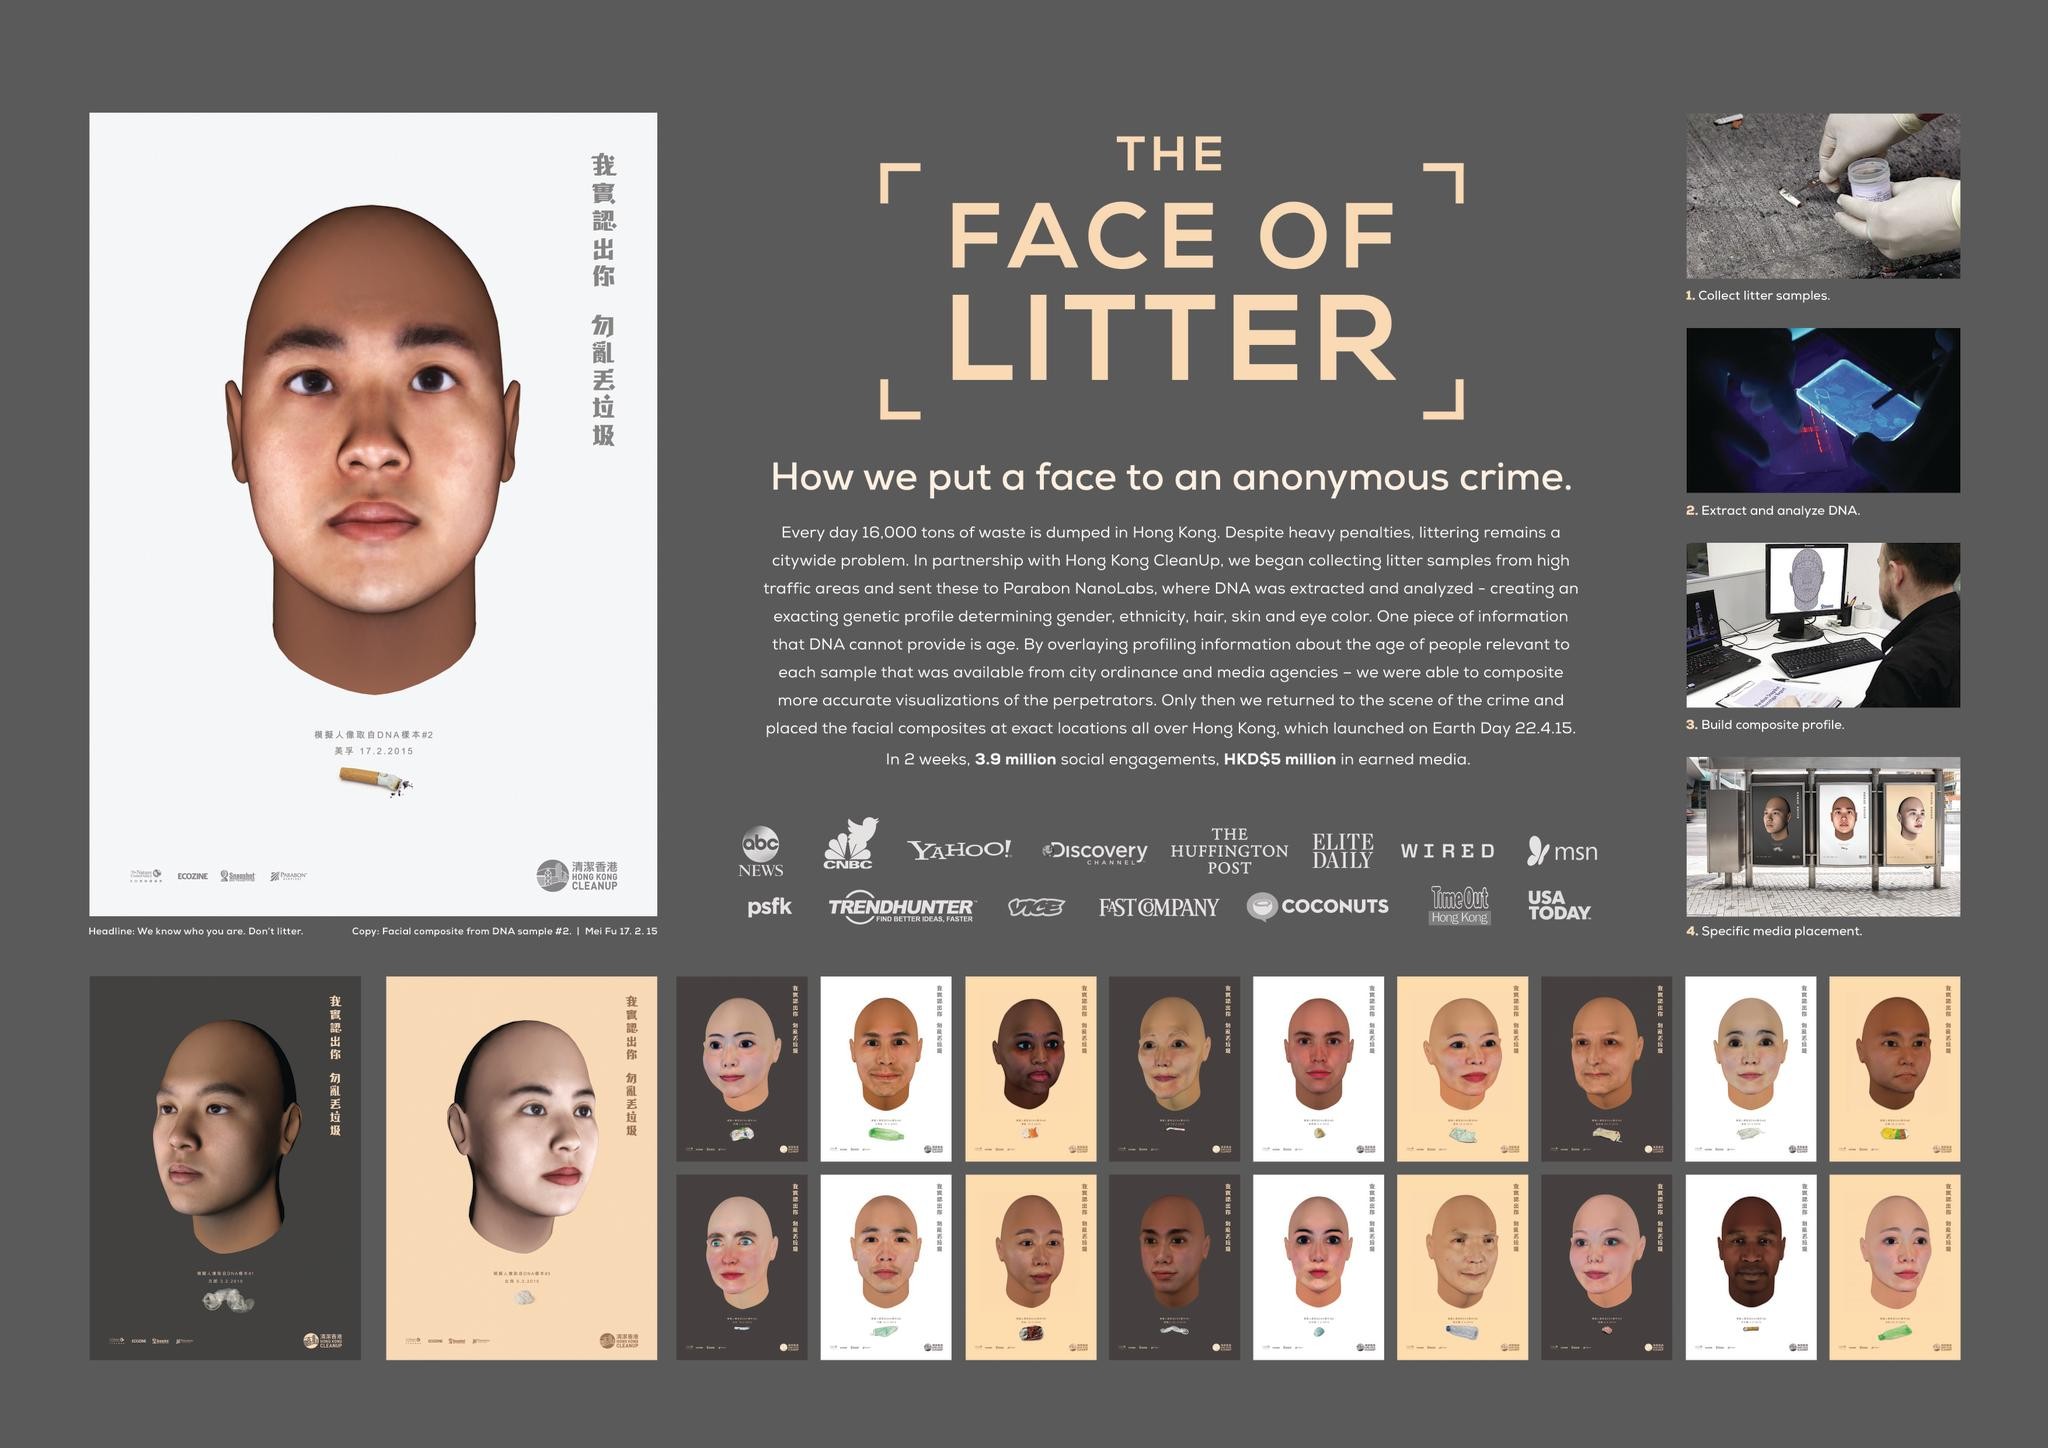 THE FACE OF LITTER